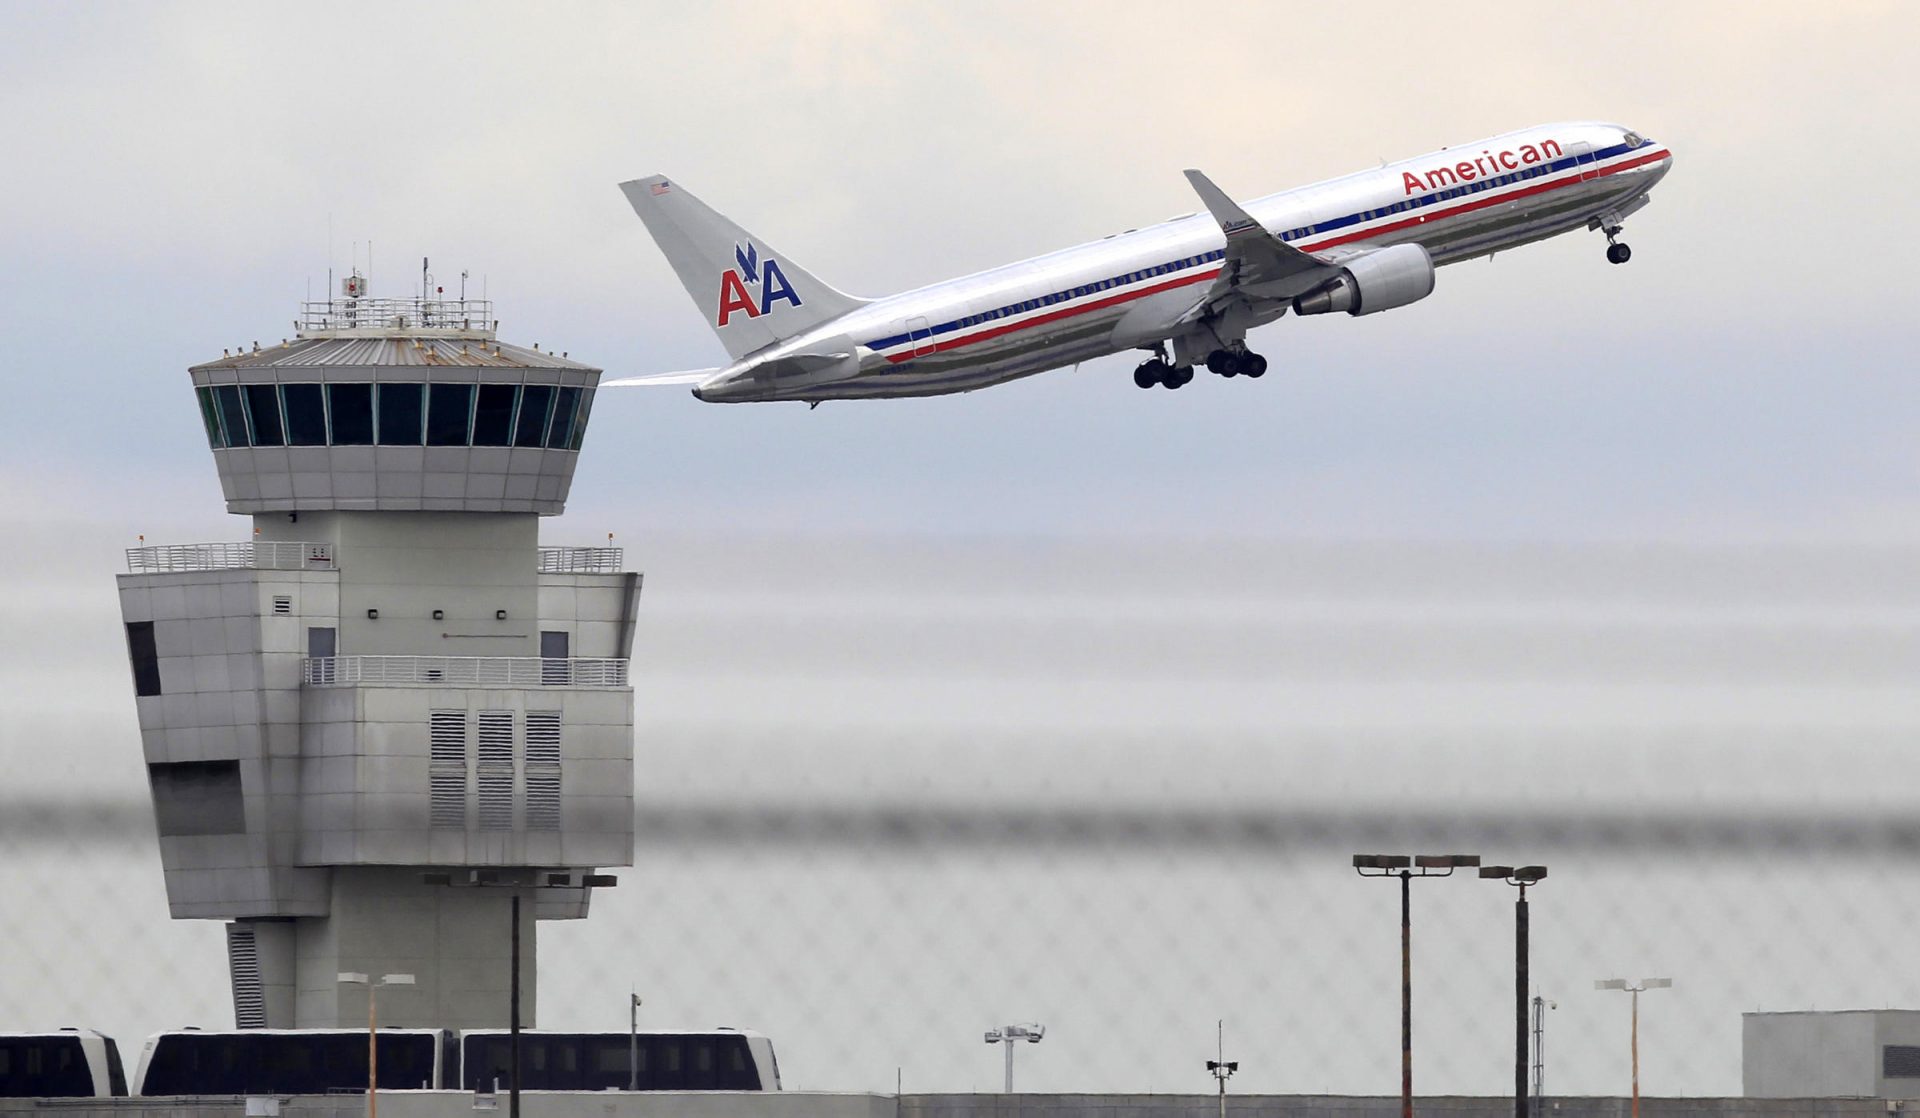 In this Friday, Oct. 14, 2011 photo, an American Airlines Boeing 767 takes off from Miami International Airport, in Miami. Even higher fares couldn't pull American Airlines out of its financial nosedive. American's parent, AMR Corp., said Wednesday, Oct. 14, 2011, that it lost $162 million in the third quarter, as fuel spending jumped 40 percent, wiping out higher revenue from fare increases and passenger fees.